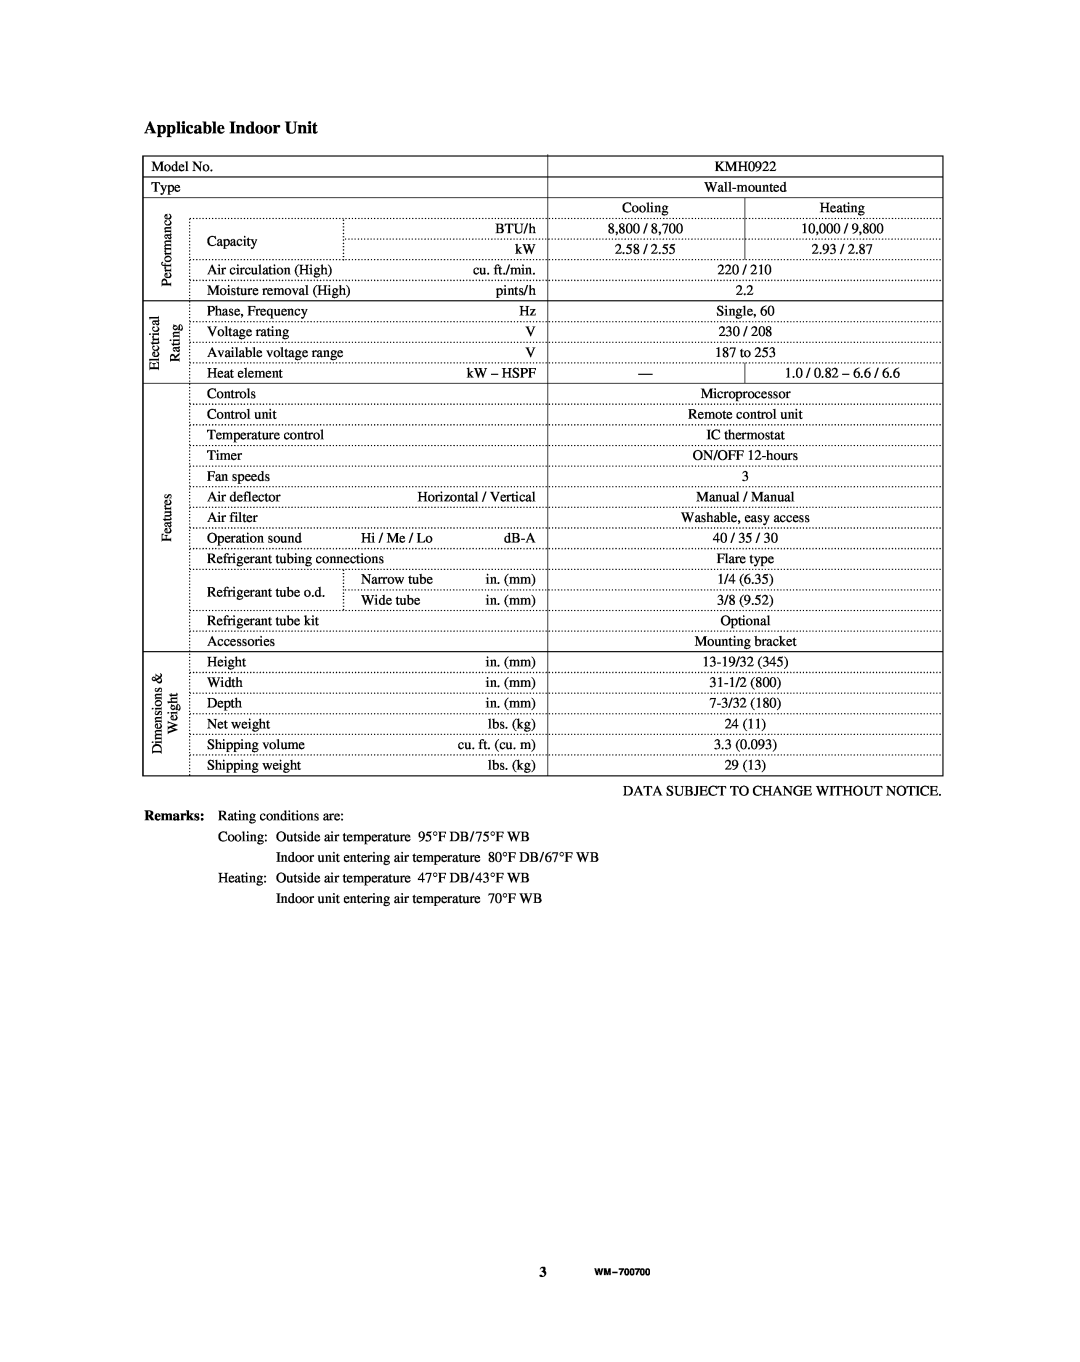 Sanyo CMH1822 service manual Applicable Indoor Unit, KMH0922, Microprocessor, IC thermostat, ON/OFF 12-hours 